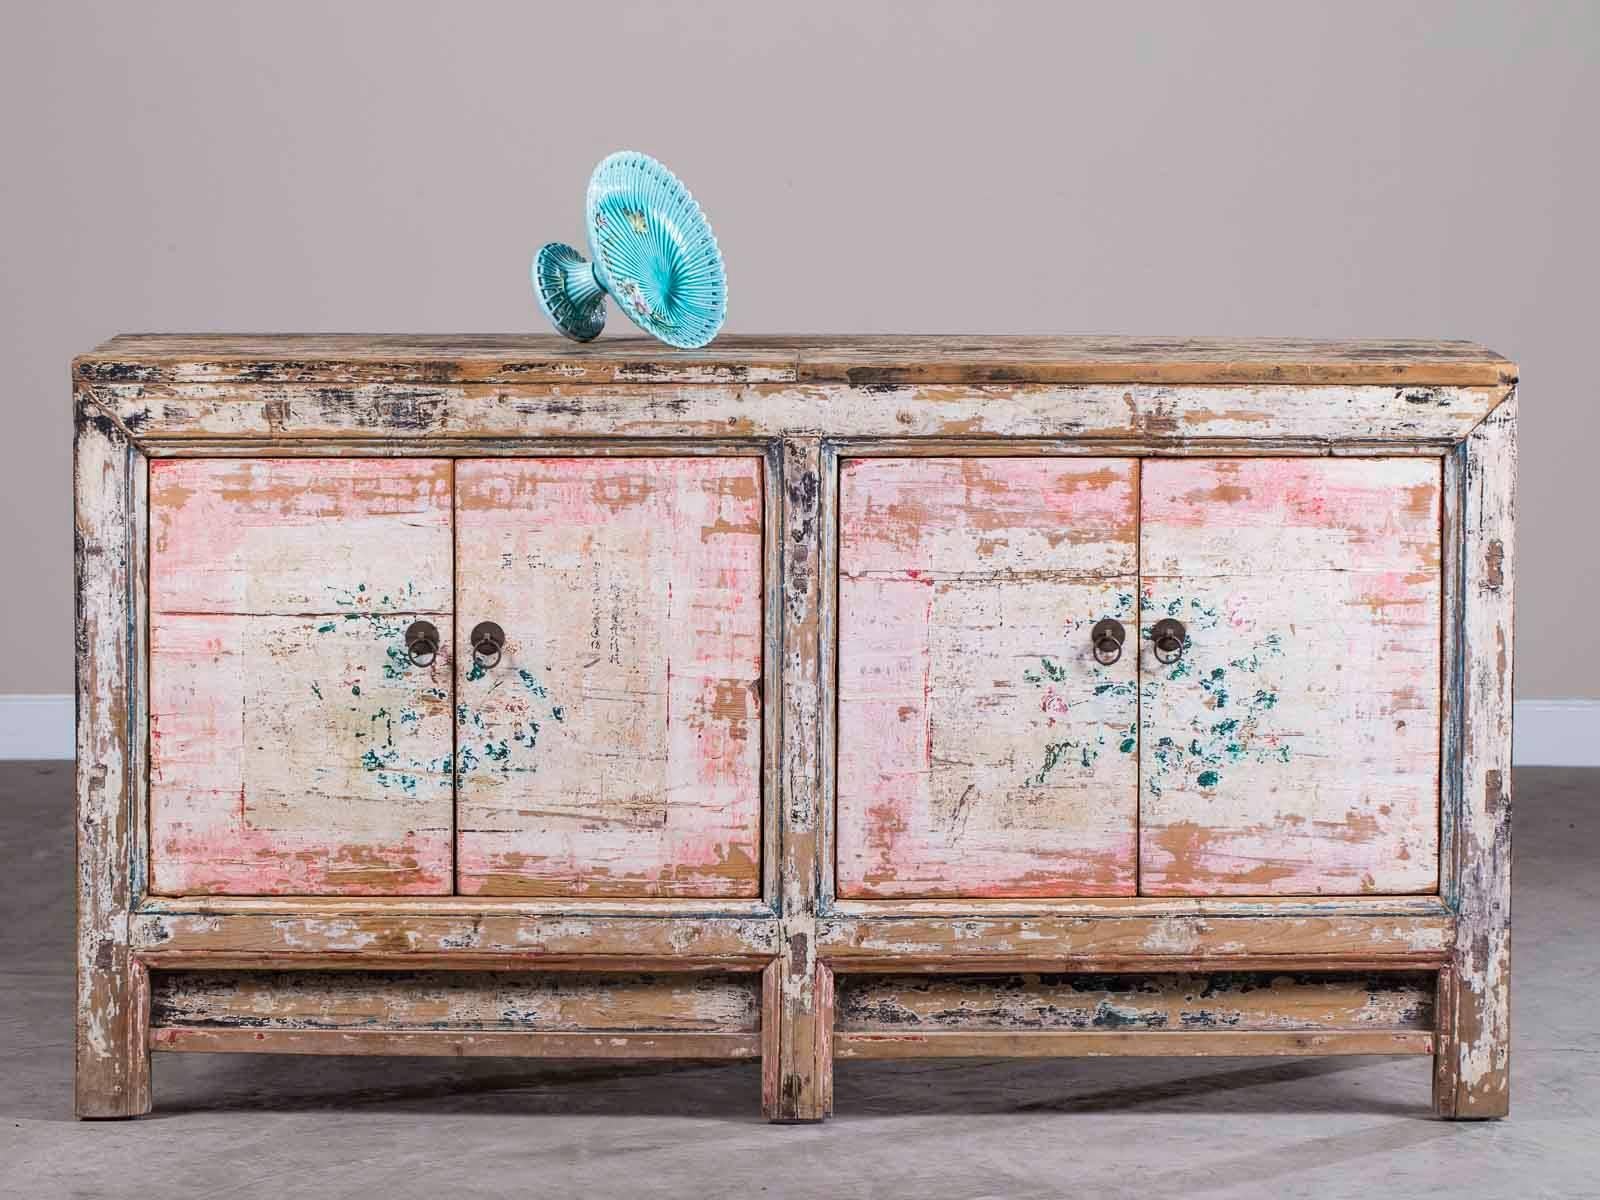 A vintage Chinese painted four-door buffet in pink and black, circa 1940. The beautiful painted finish on this Chinese buffet combines both black and pink along with faded remnants of flowers across the four cabinet doors. The modern quality of the